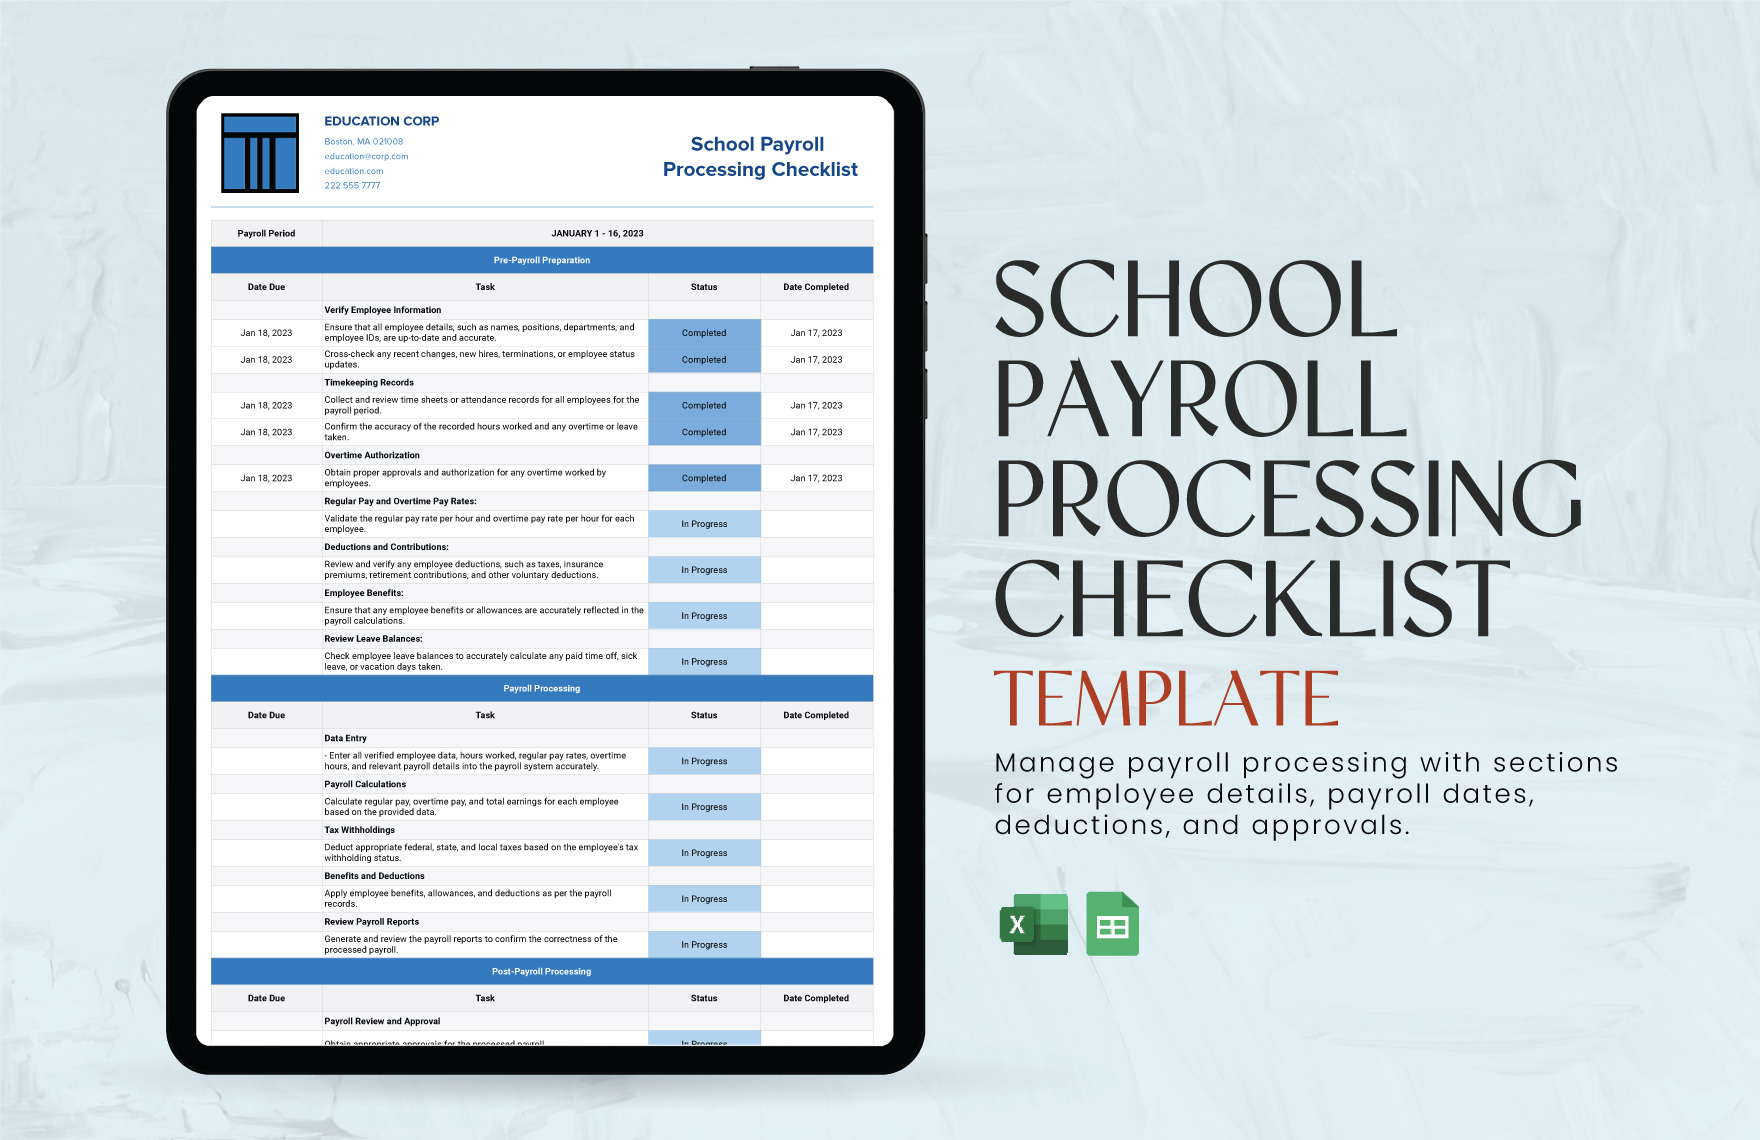 School Payroll Processing Checklist Template in Excel, Google Sheets